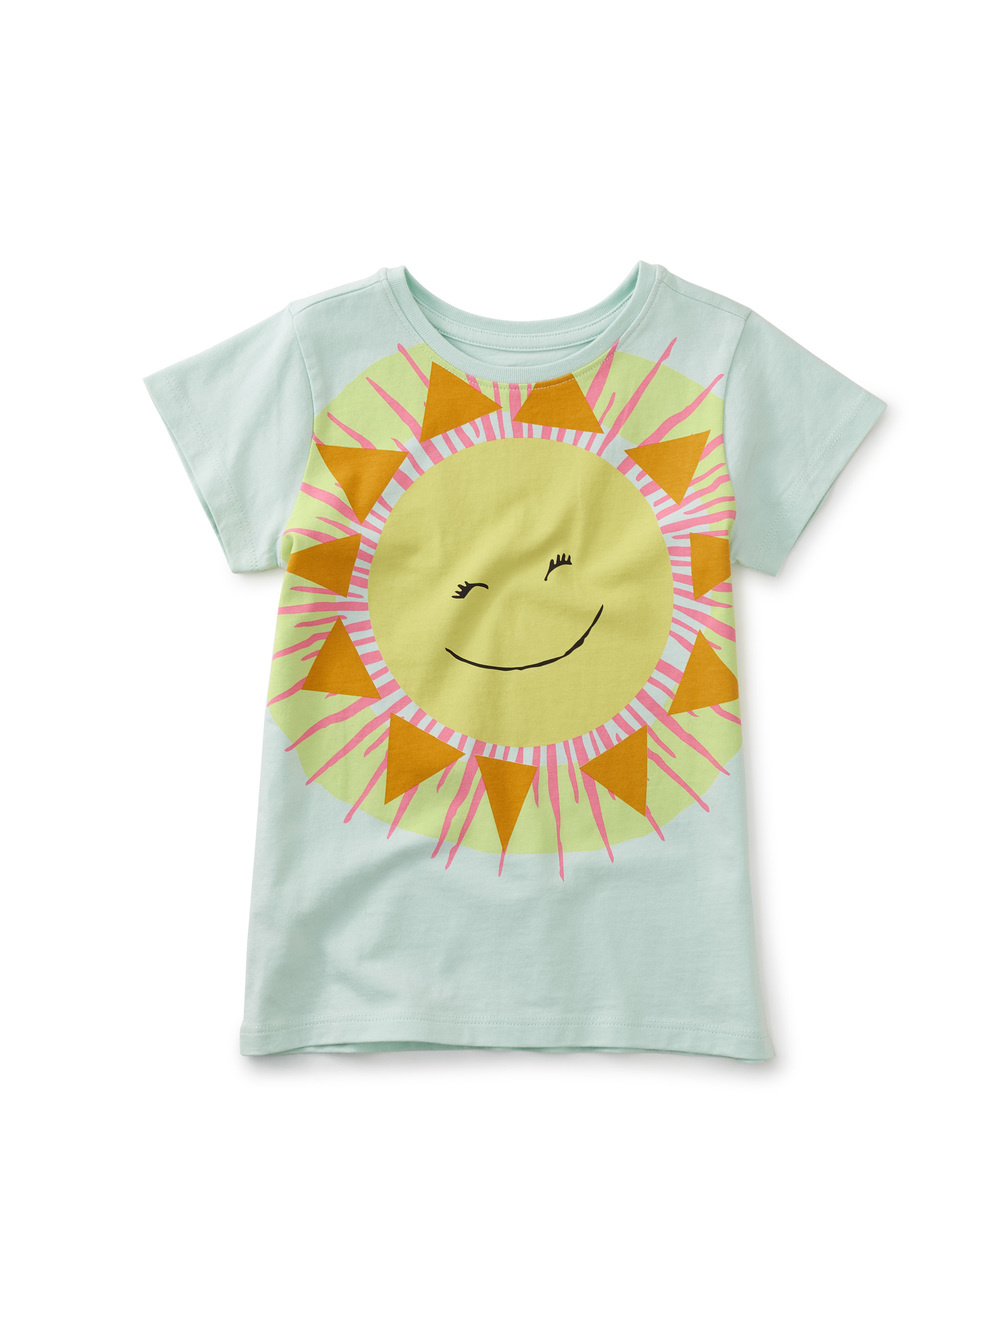 Tea Collection Sunny Graphic Tee